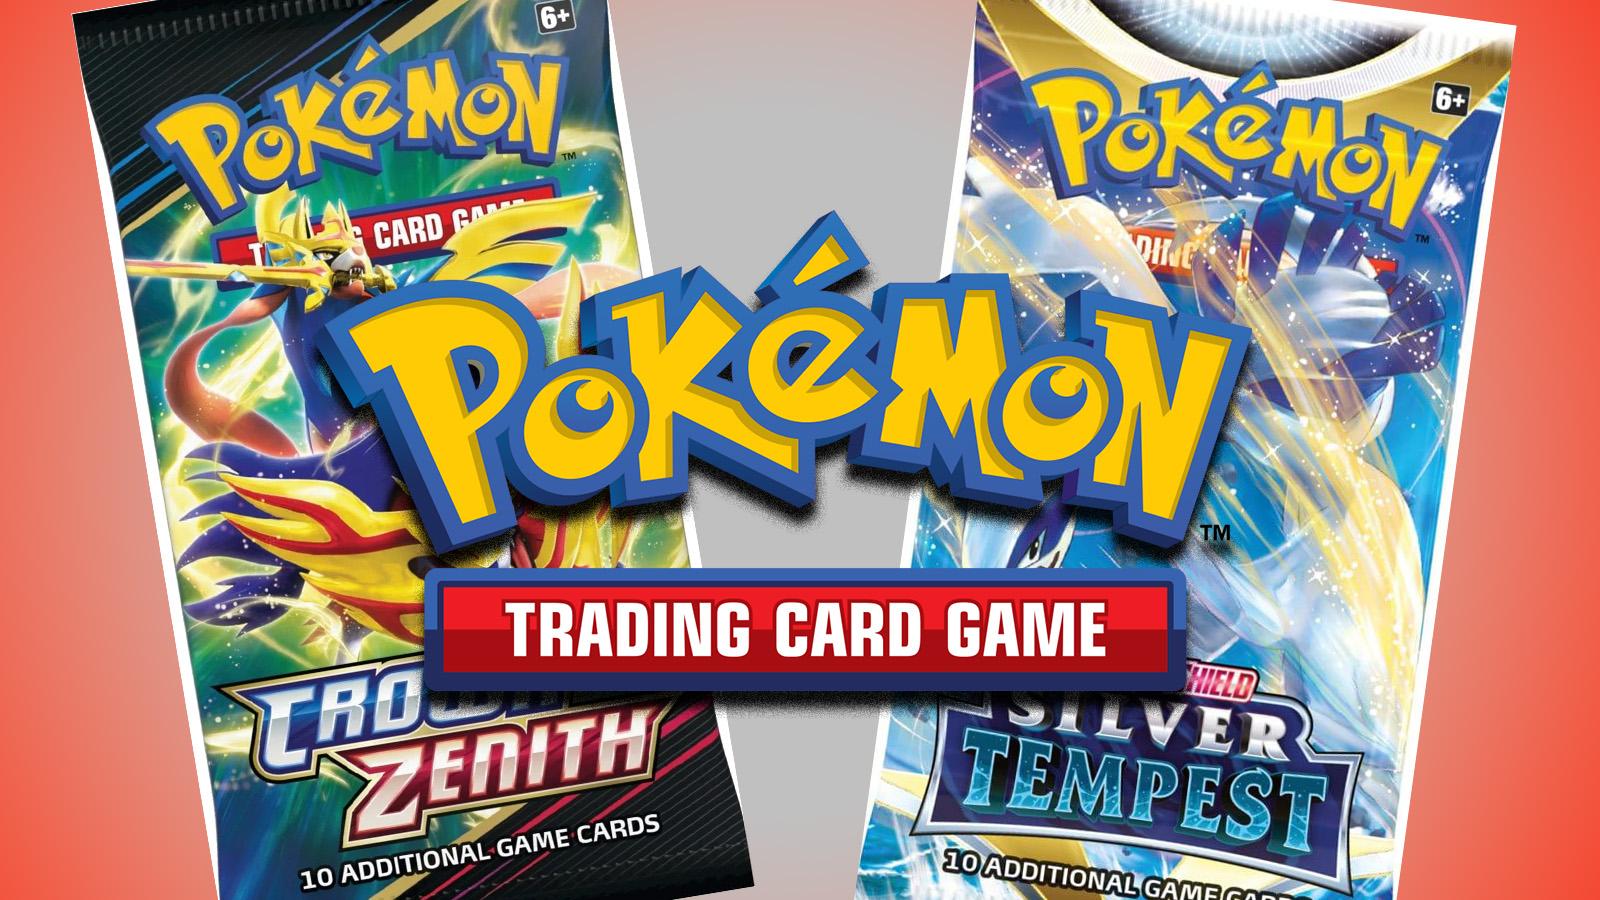 Deoxys Pokemon Card Price Guide – Sports Card Investor